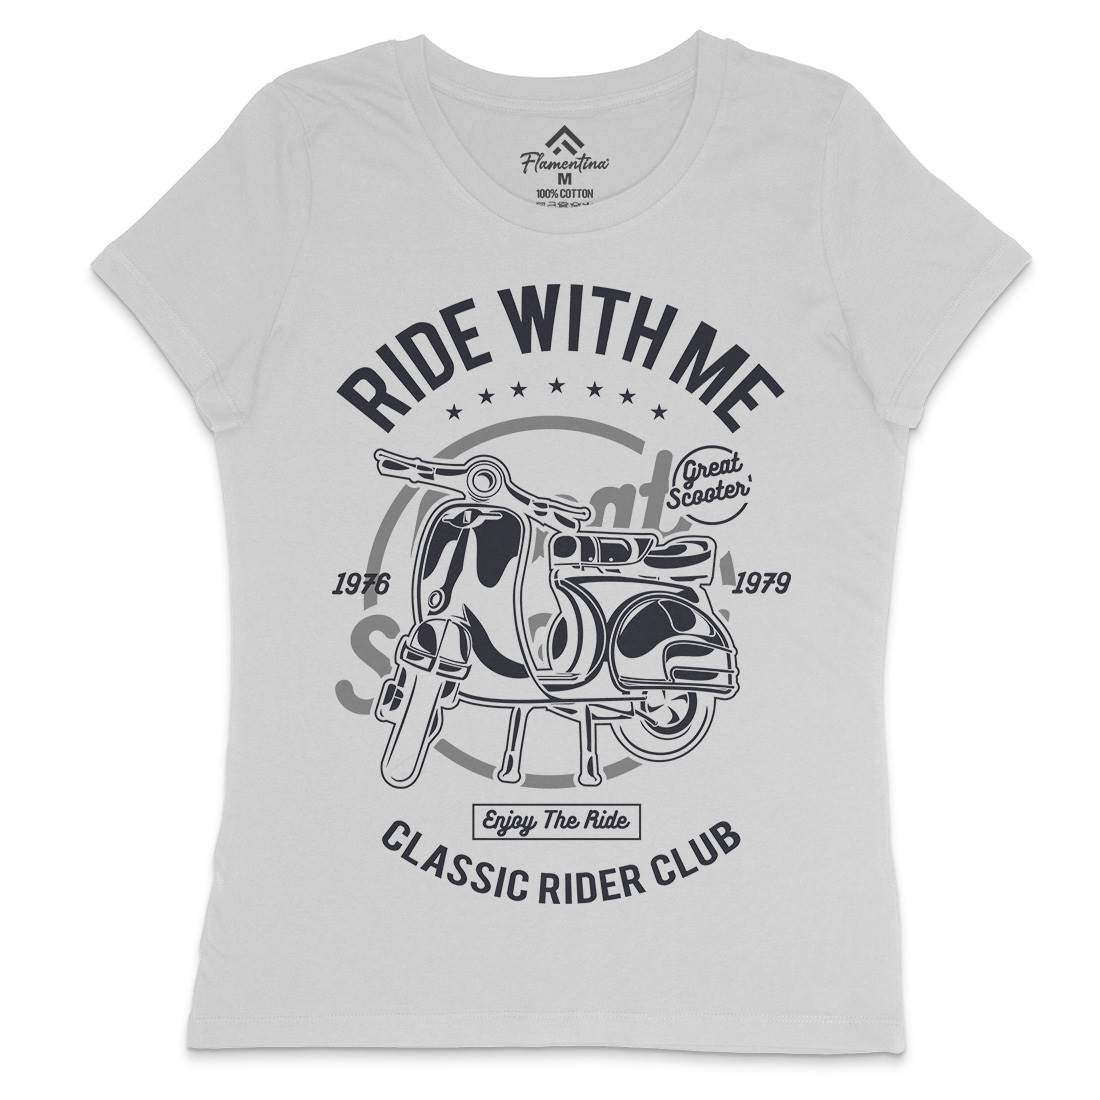 Ride With Me Womens Crew Neck T-Shirt Motorcycles A120